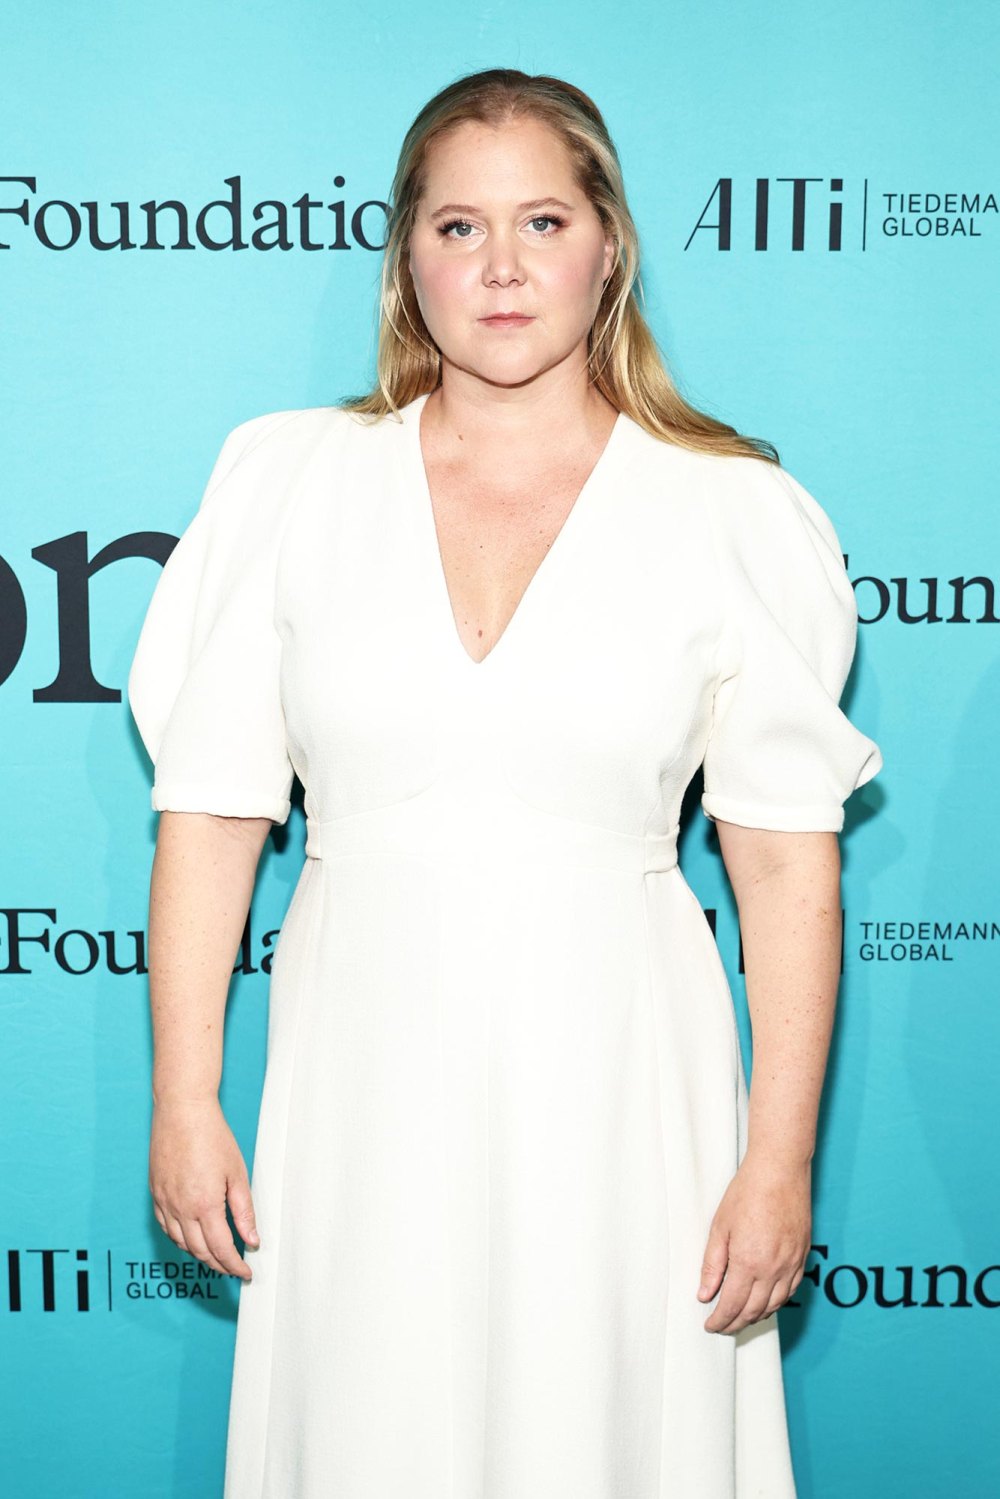 Amy Schumer Feels Reborn After Puffy Face Comments Led to Cushing Syndrome Diagnosis